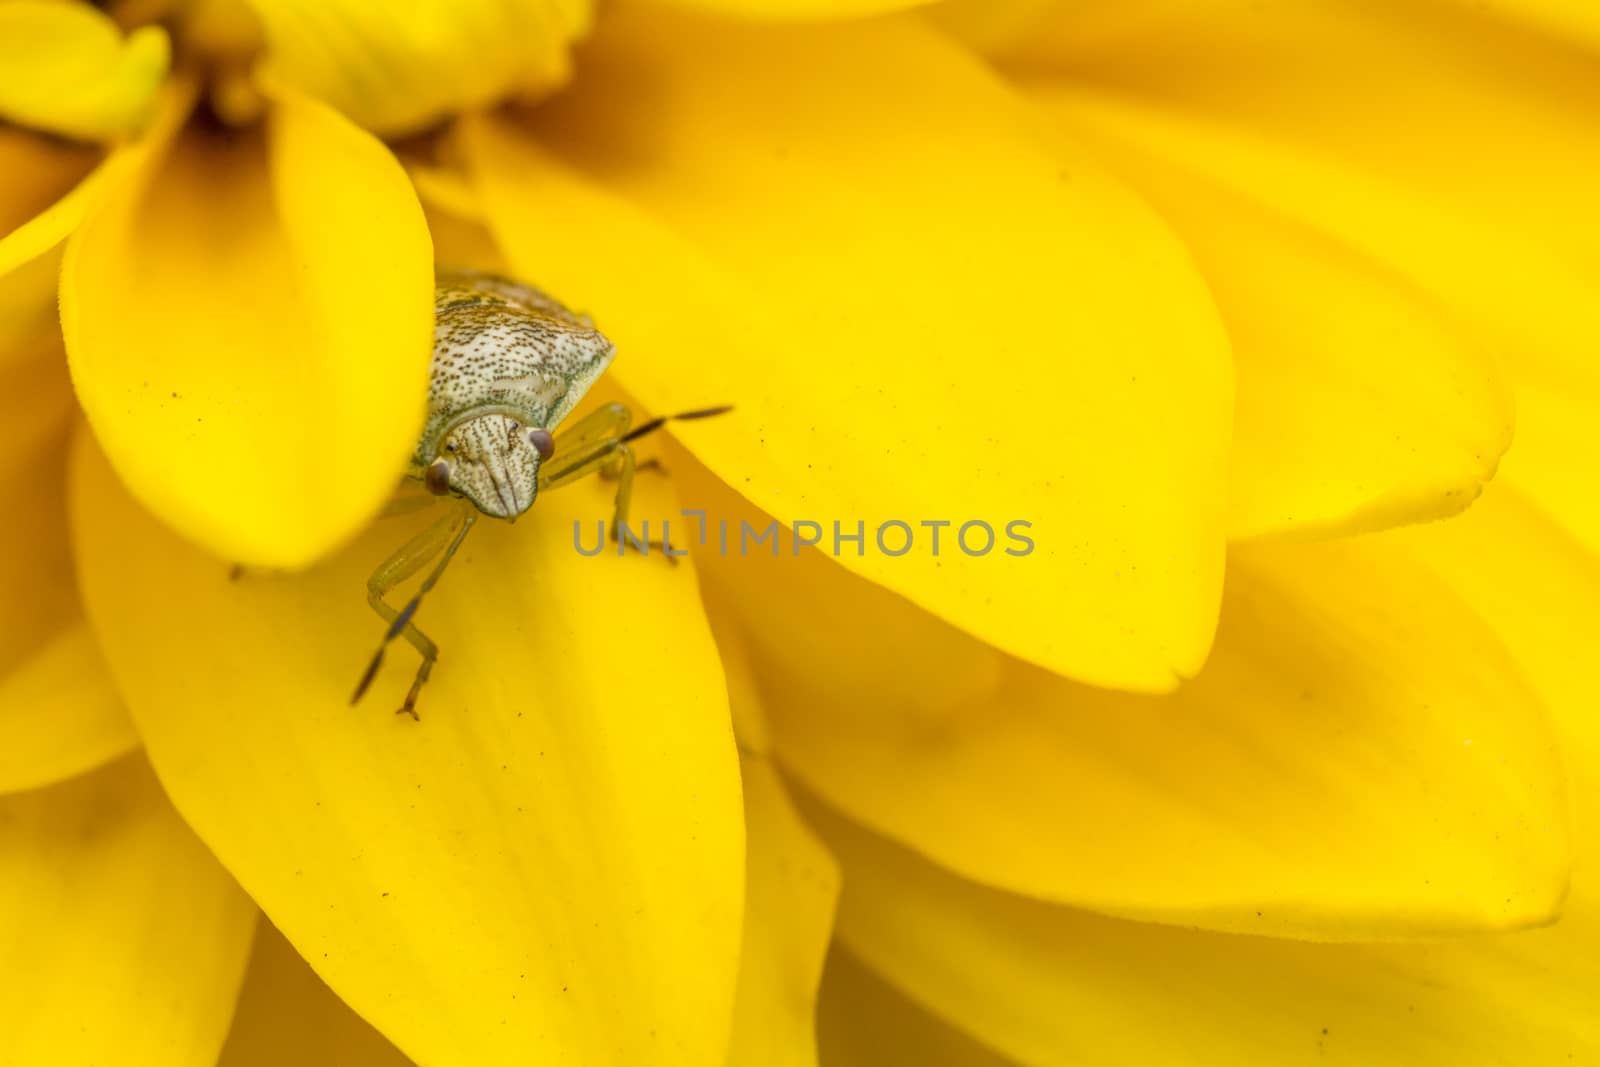 Tiny insect on a yellow flower by derejeb